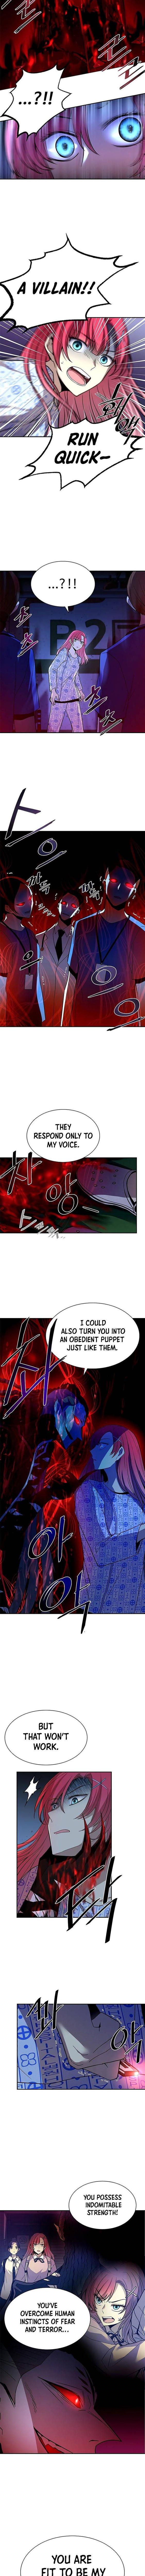 Villain To Kill Chapter 20 Page 5